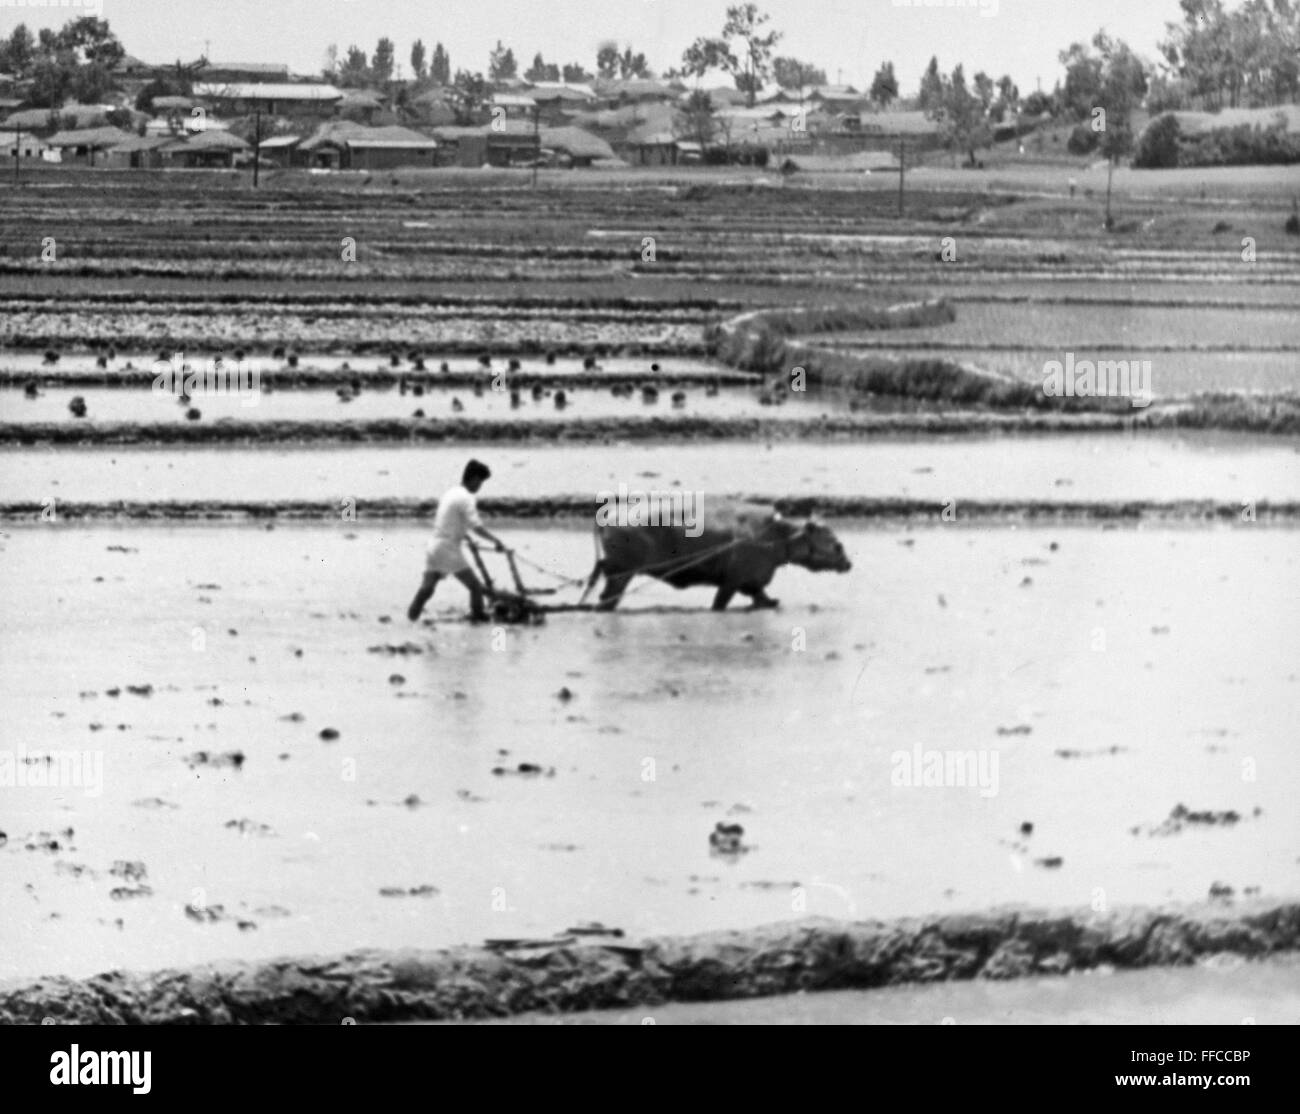 KOREA: RICE PADDY, 1950s. /nA rice paddy in South Korea at the time of the Korean War, 1950-1953. Stock Photo